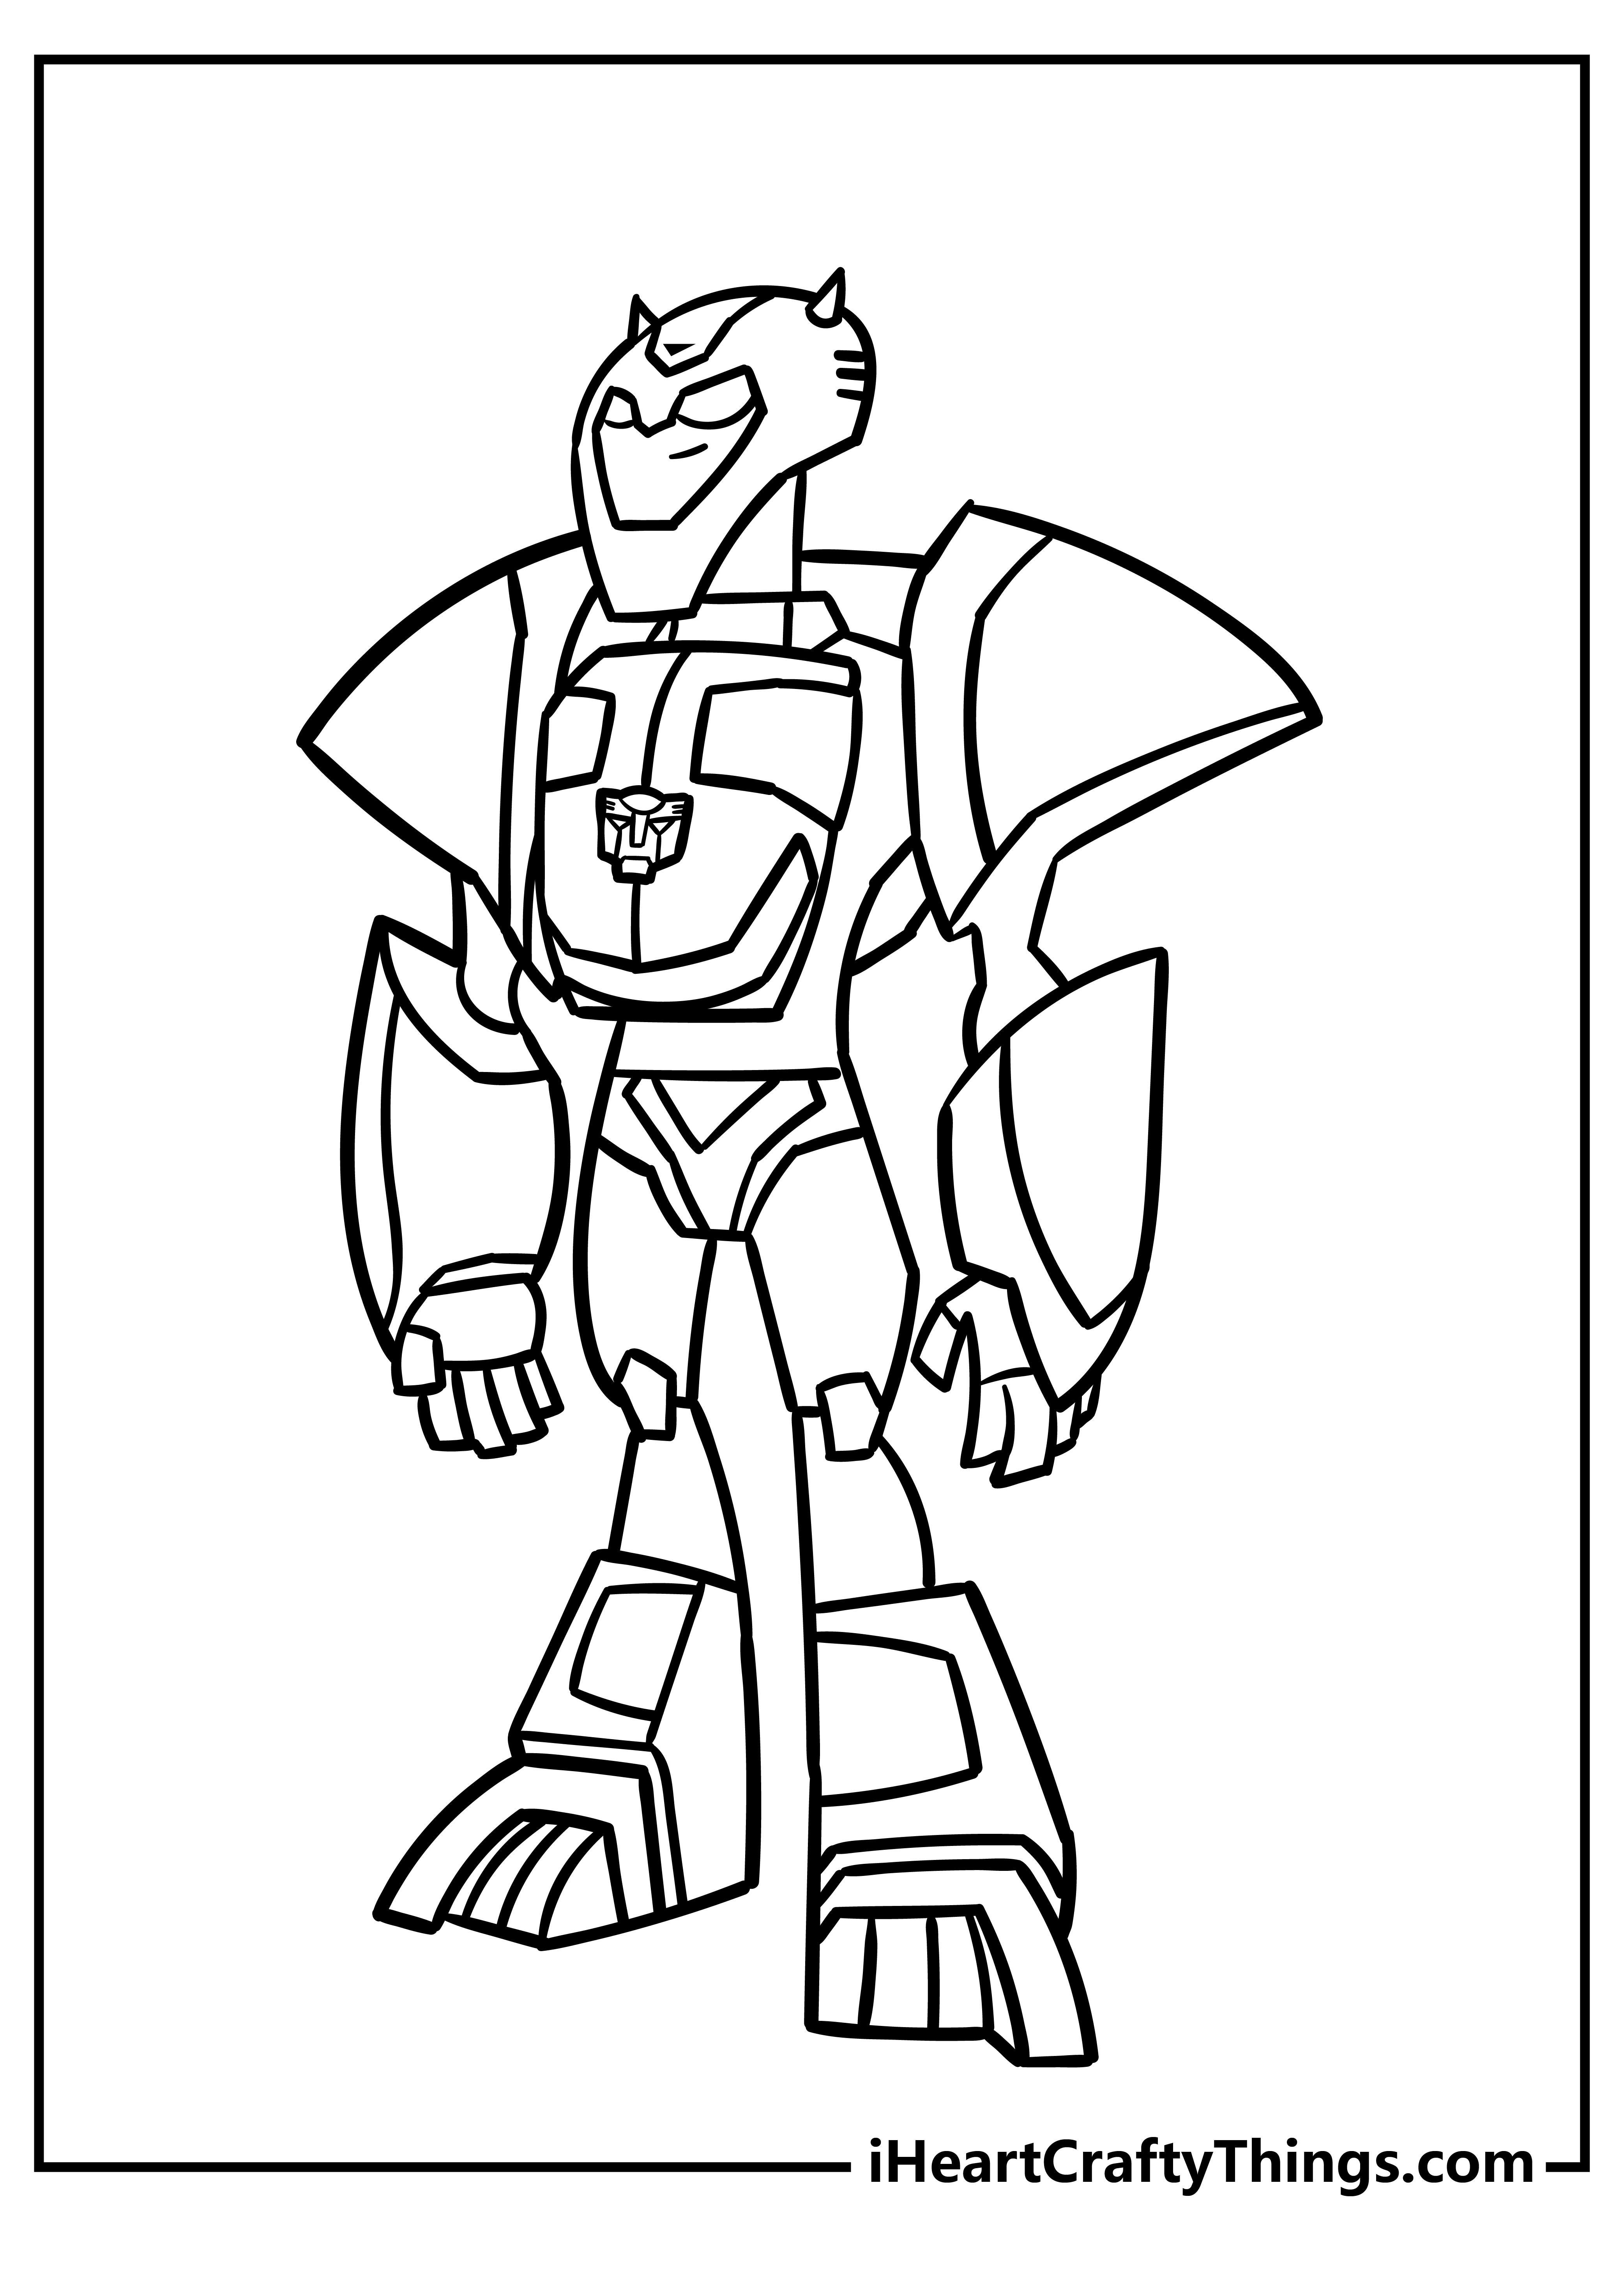 Bumblebee Coloring Pages free pdf download